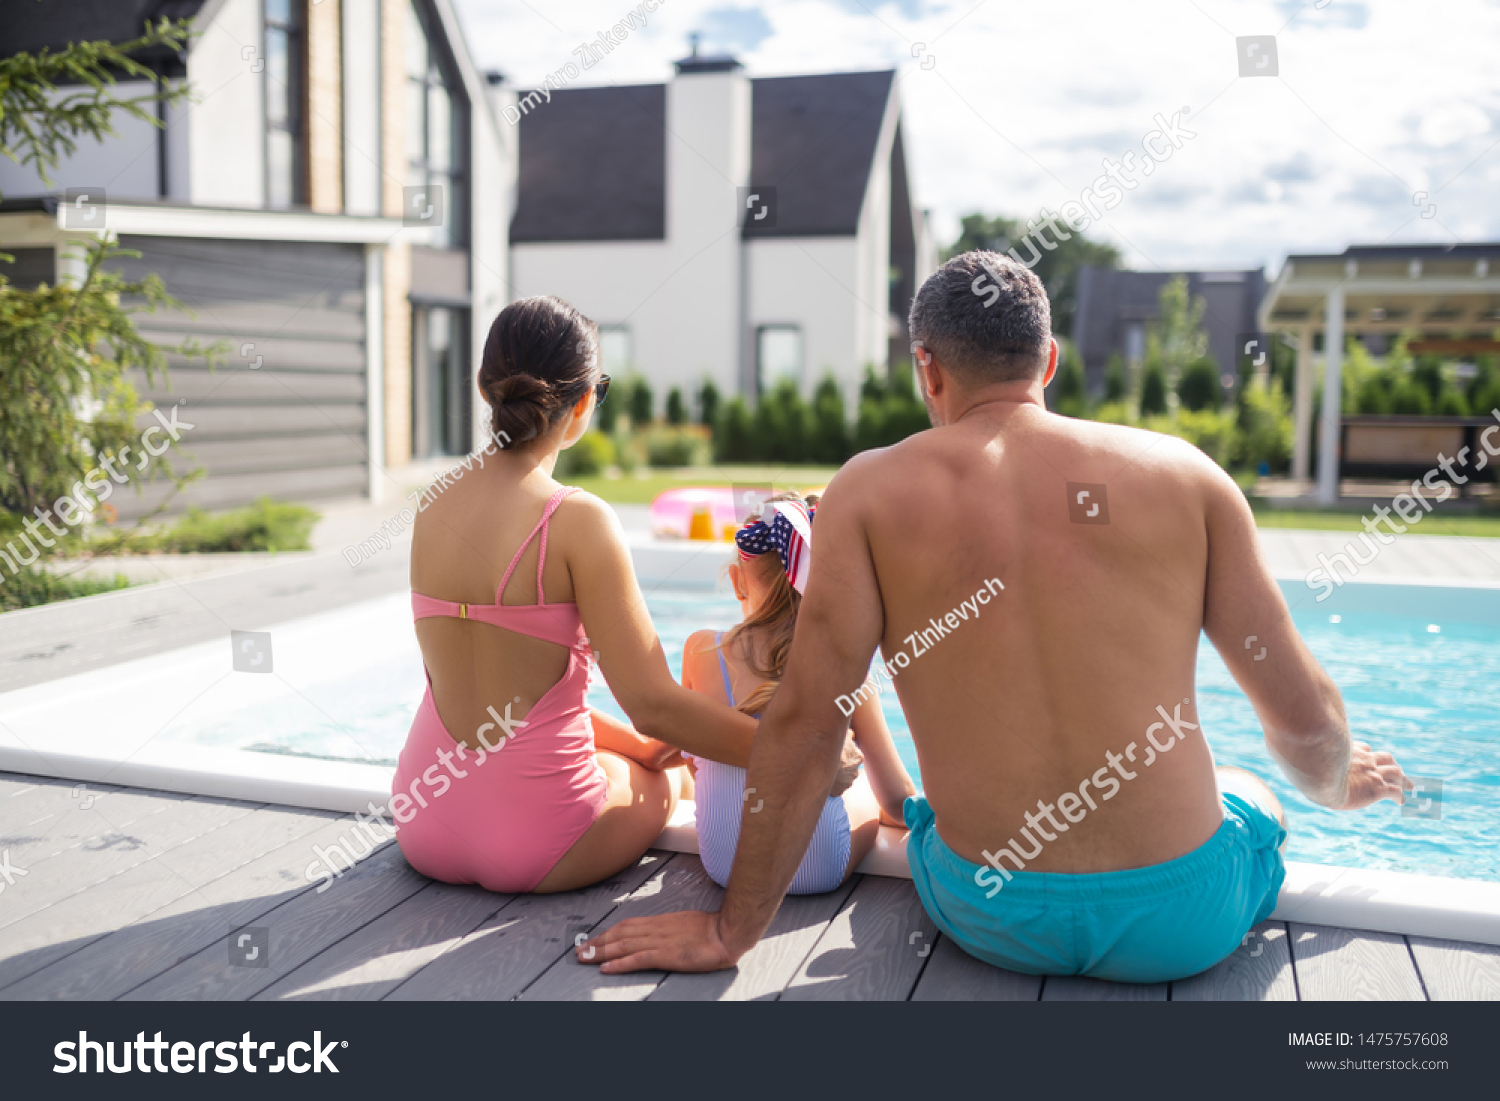 Pool near house. Happy family wearing swimsuits sitting near pool near their private house #1475757608